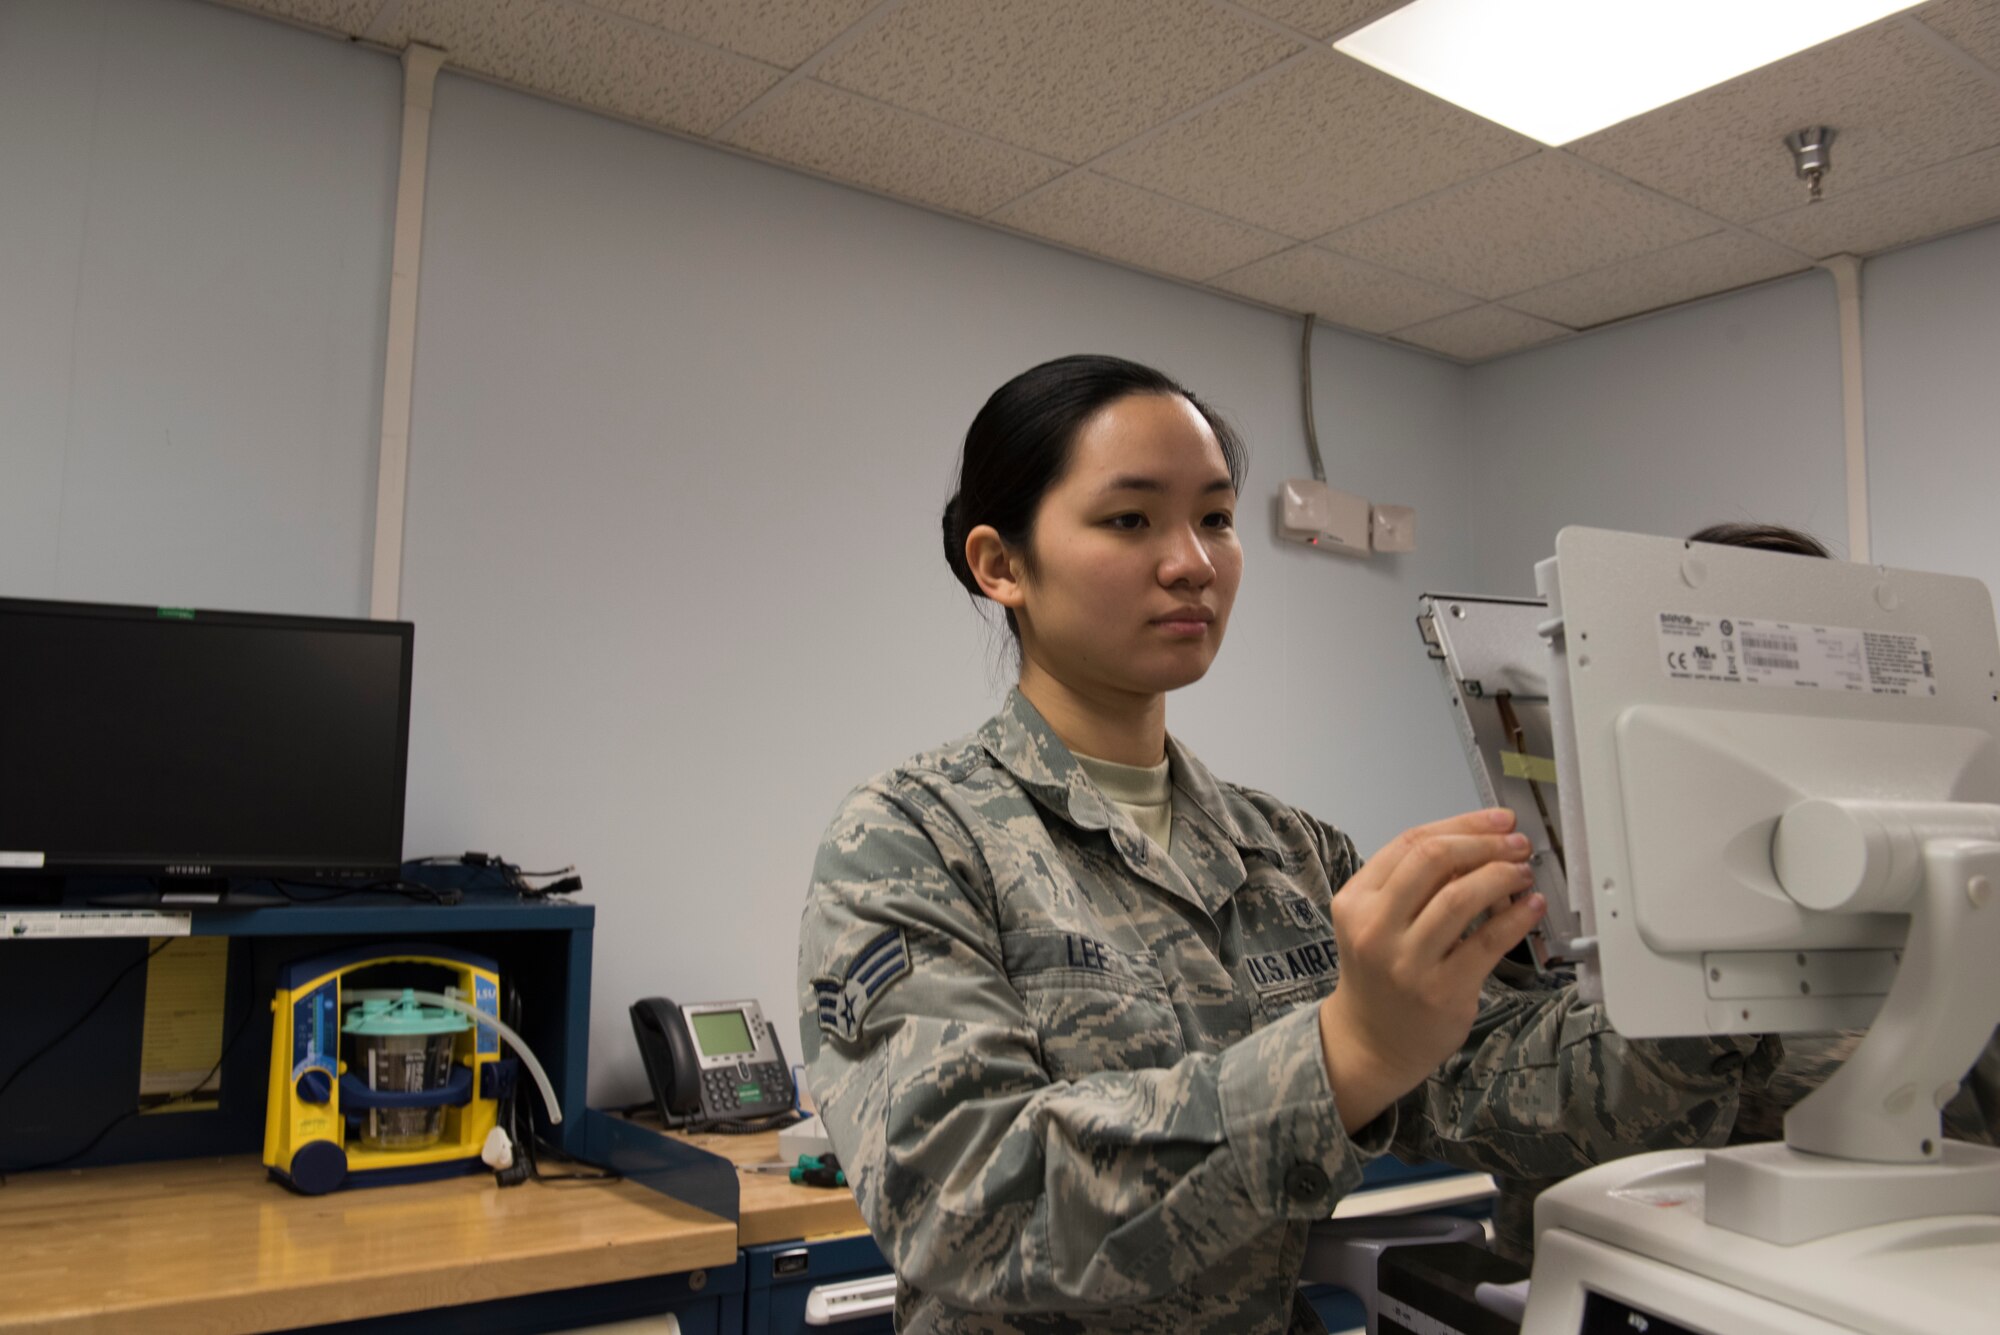 Senior Airman Kirsten Lee, 39th Medical Support Squadron biomedical equipment technician, replaces a screen March 29, 2019, at Incirlik Air Base, Turkey.